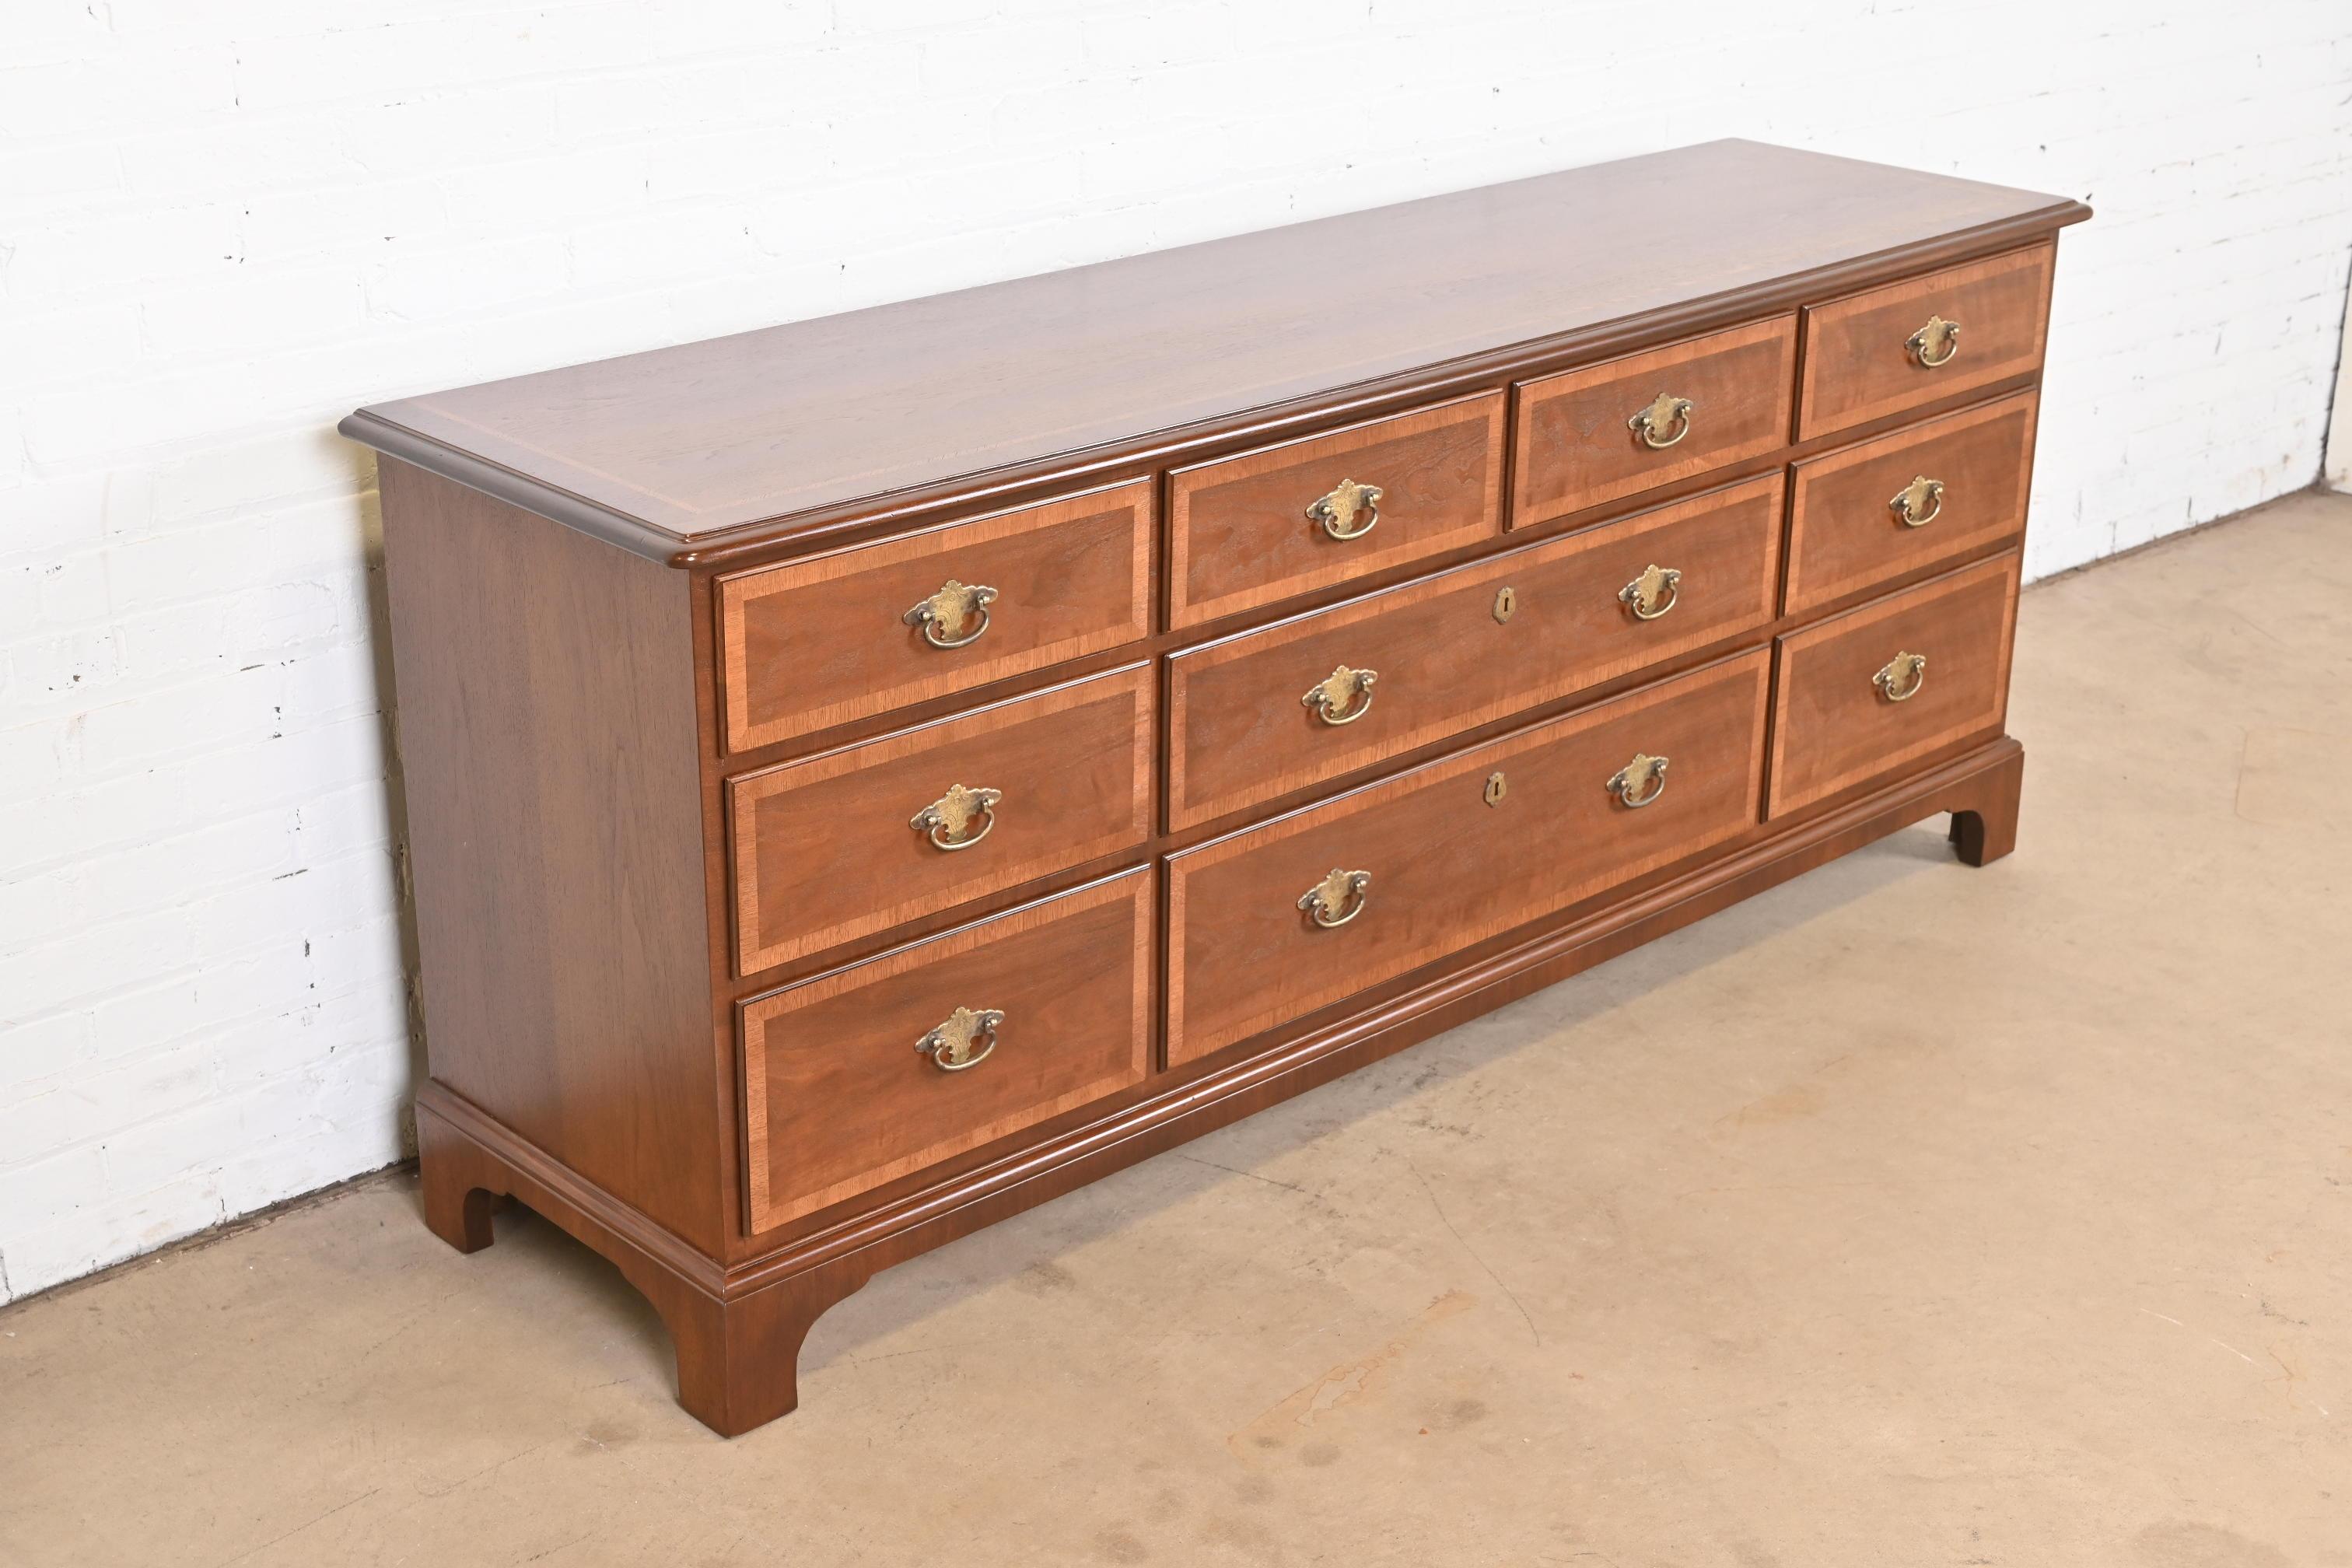 Late 20th Century Henredon Georgian Banded Mahogany Ten Drawer Dresser or Credenza, Refinished